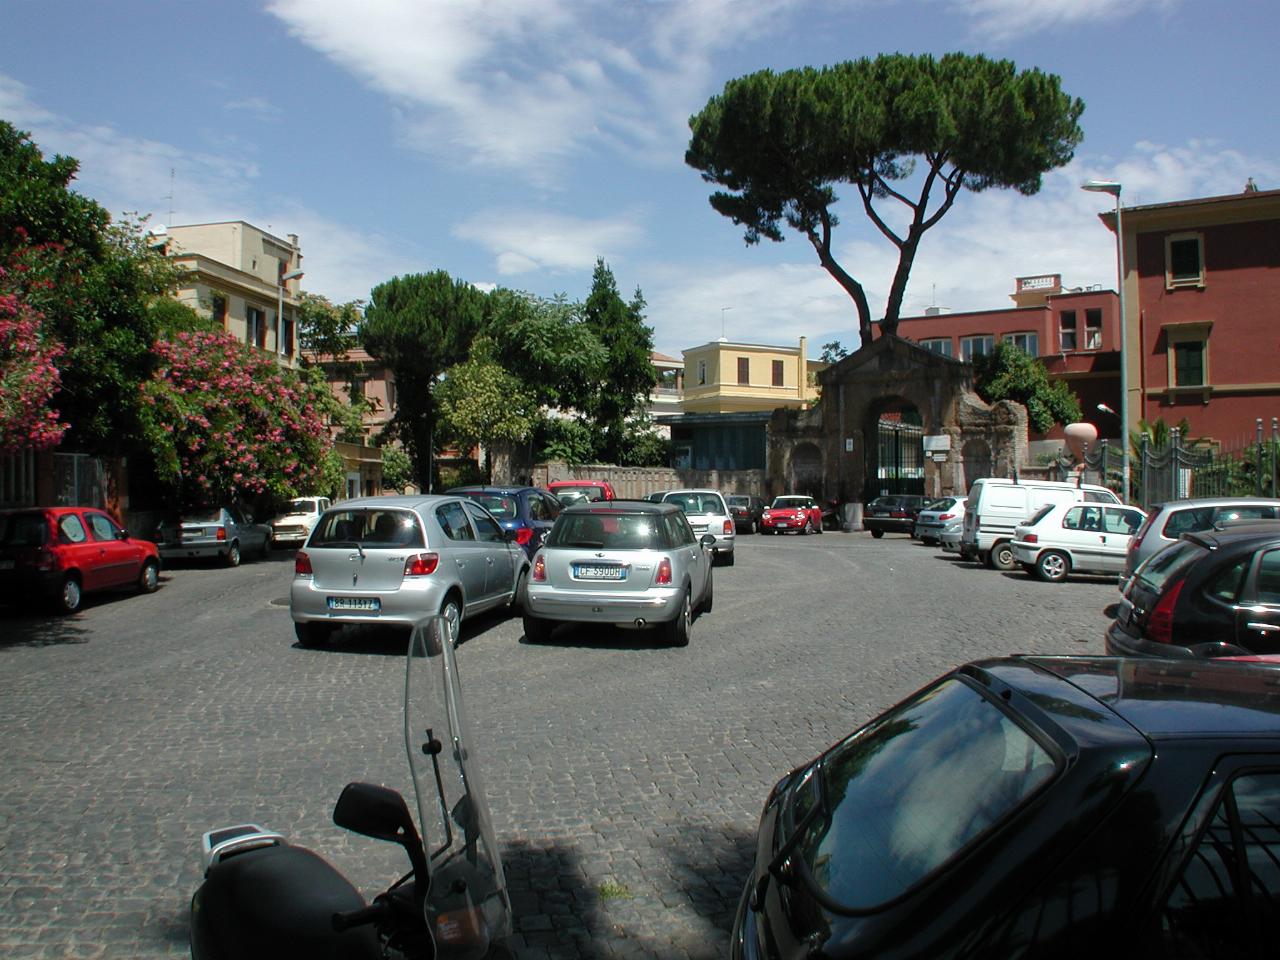 Tight, typical parking in street behind Villa Paganini